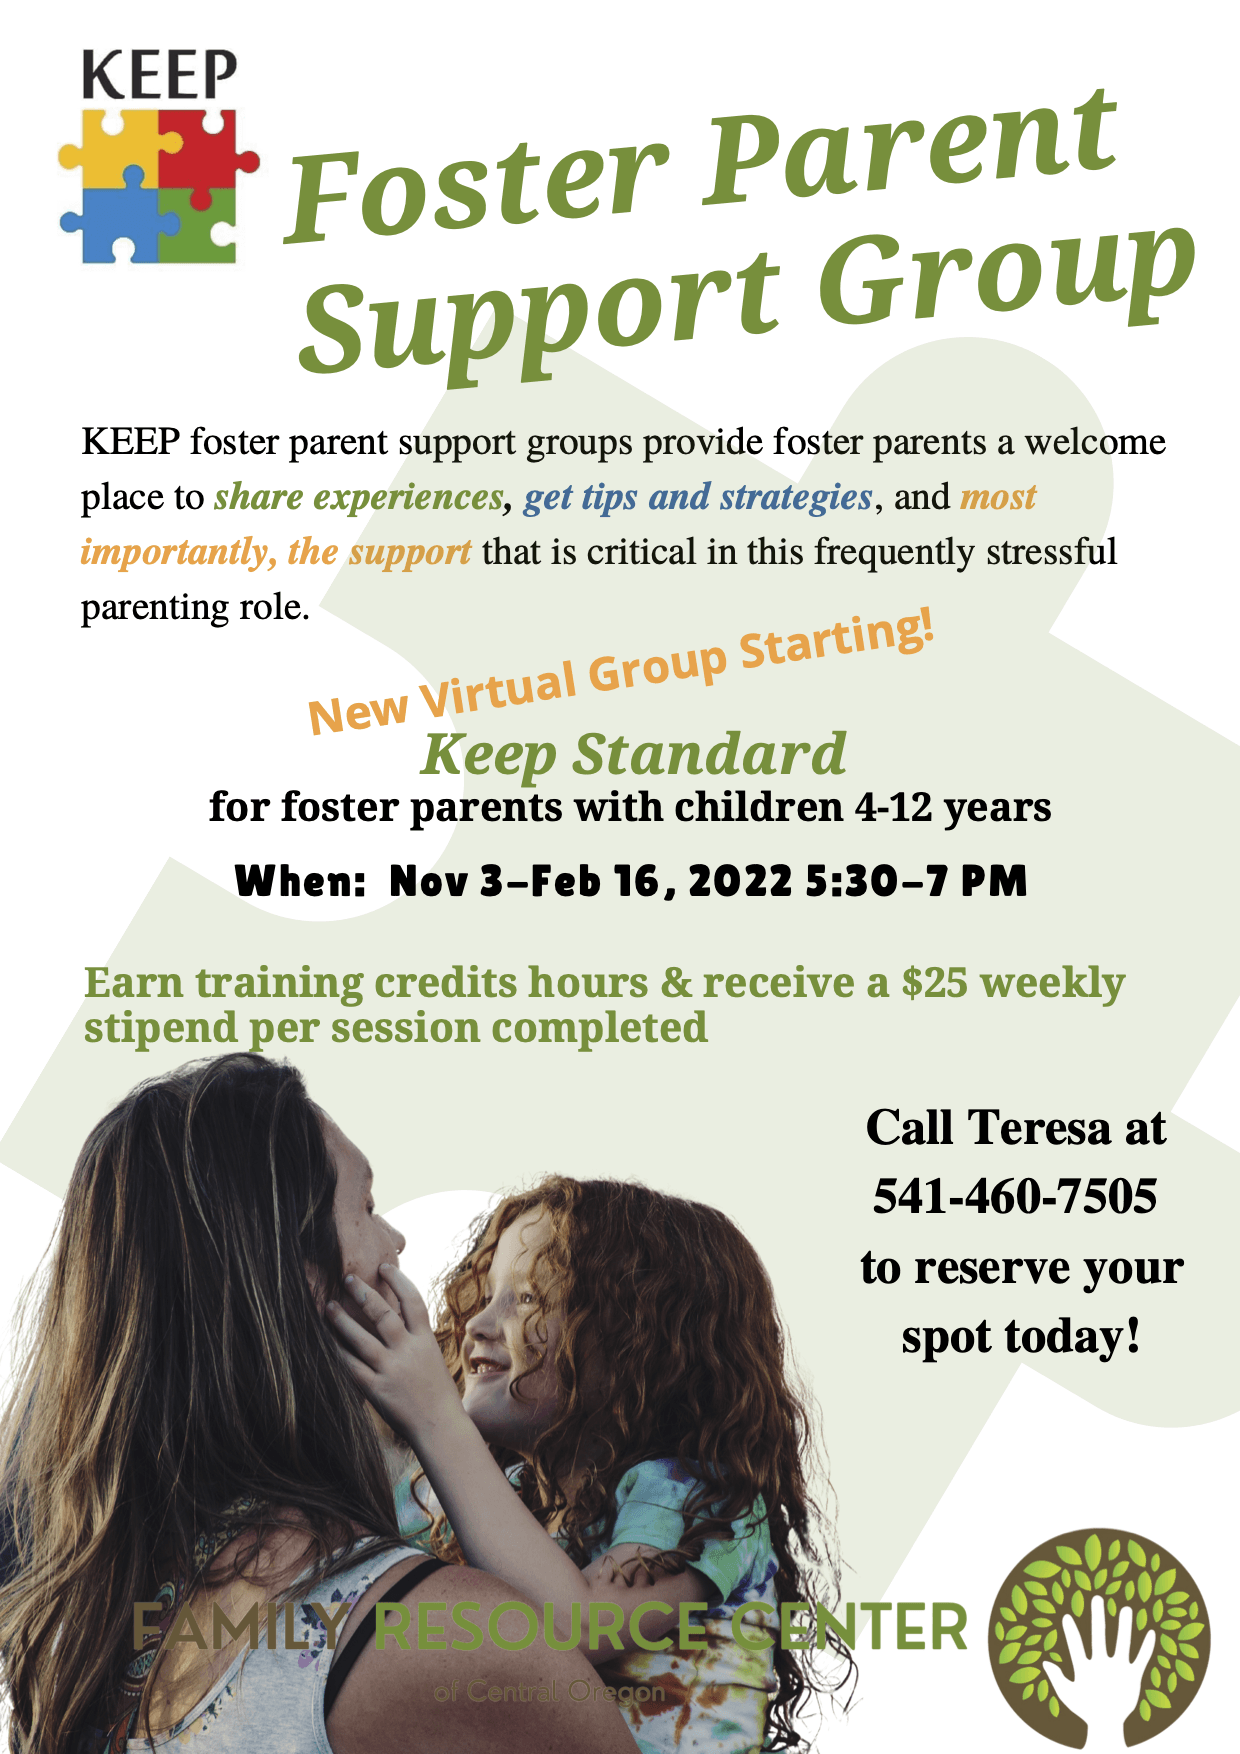 Flyer for Foster Parent Support Group Class